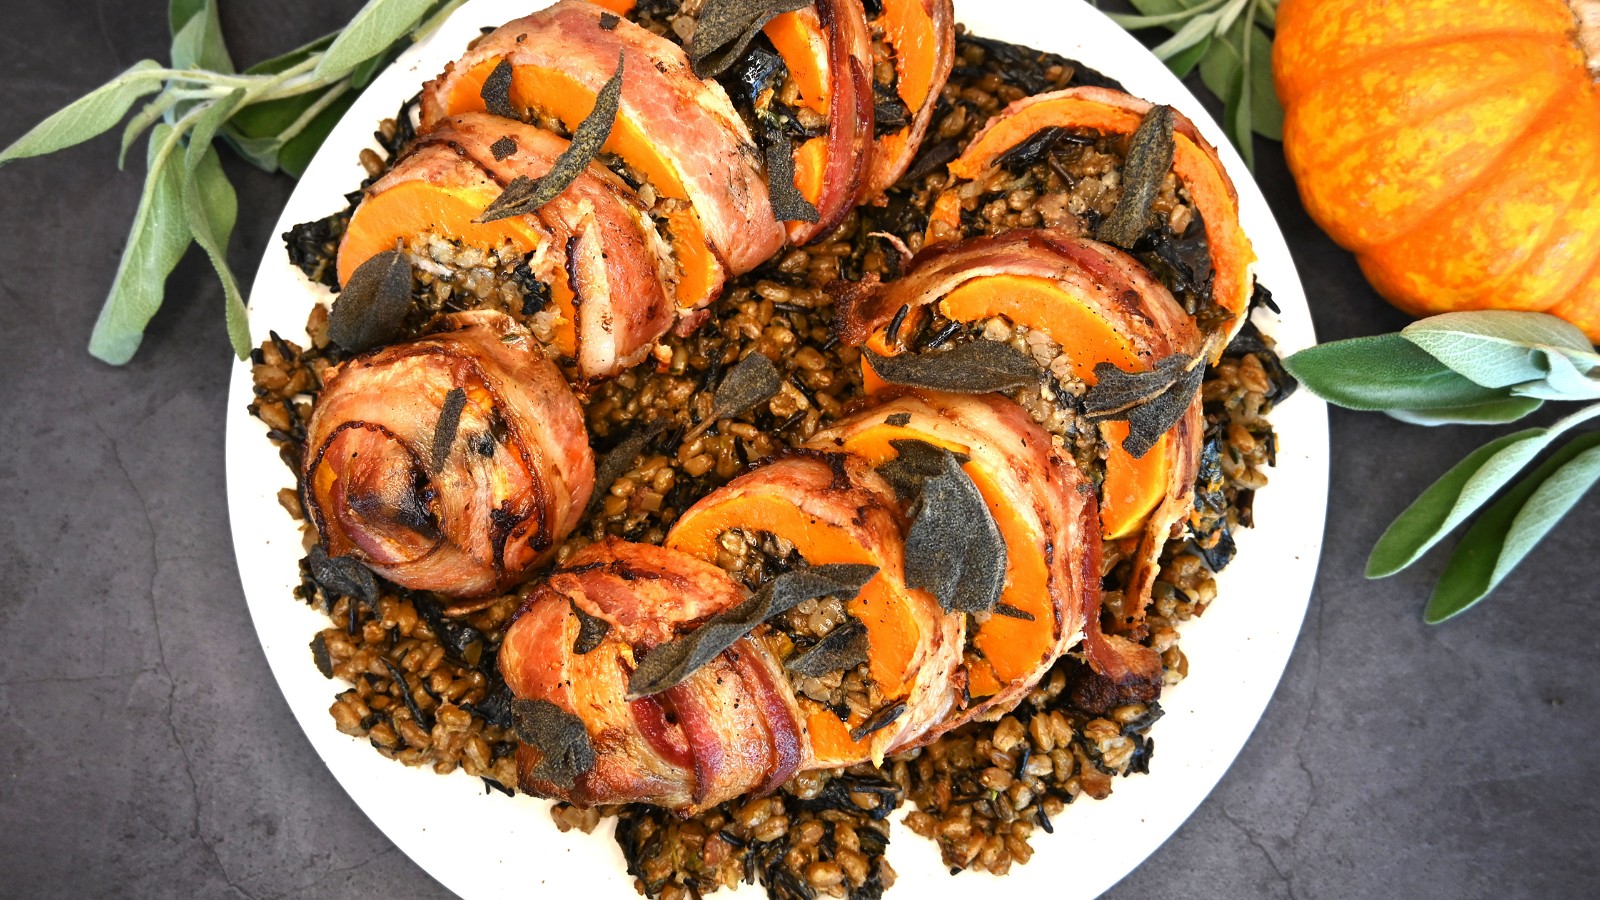 Image of Bacon Wrapped Stuffed Squash with Black Trumpets and Faro